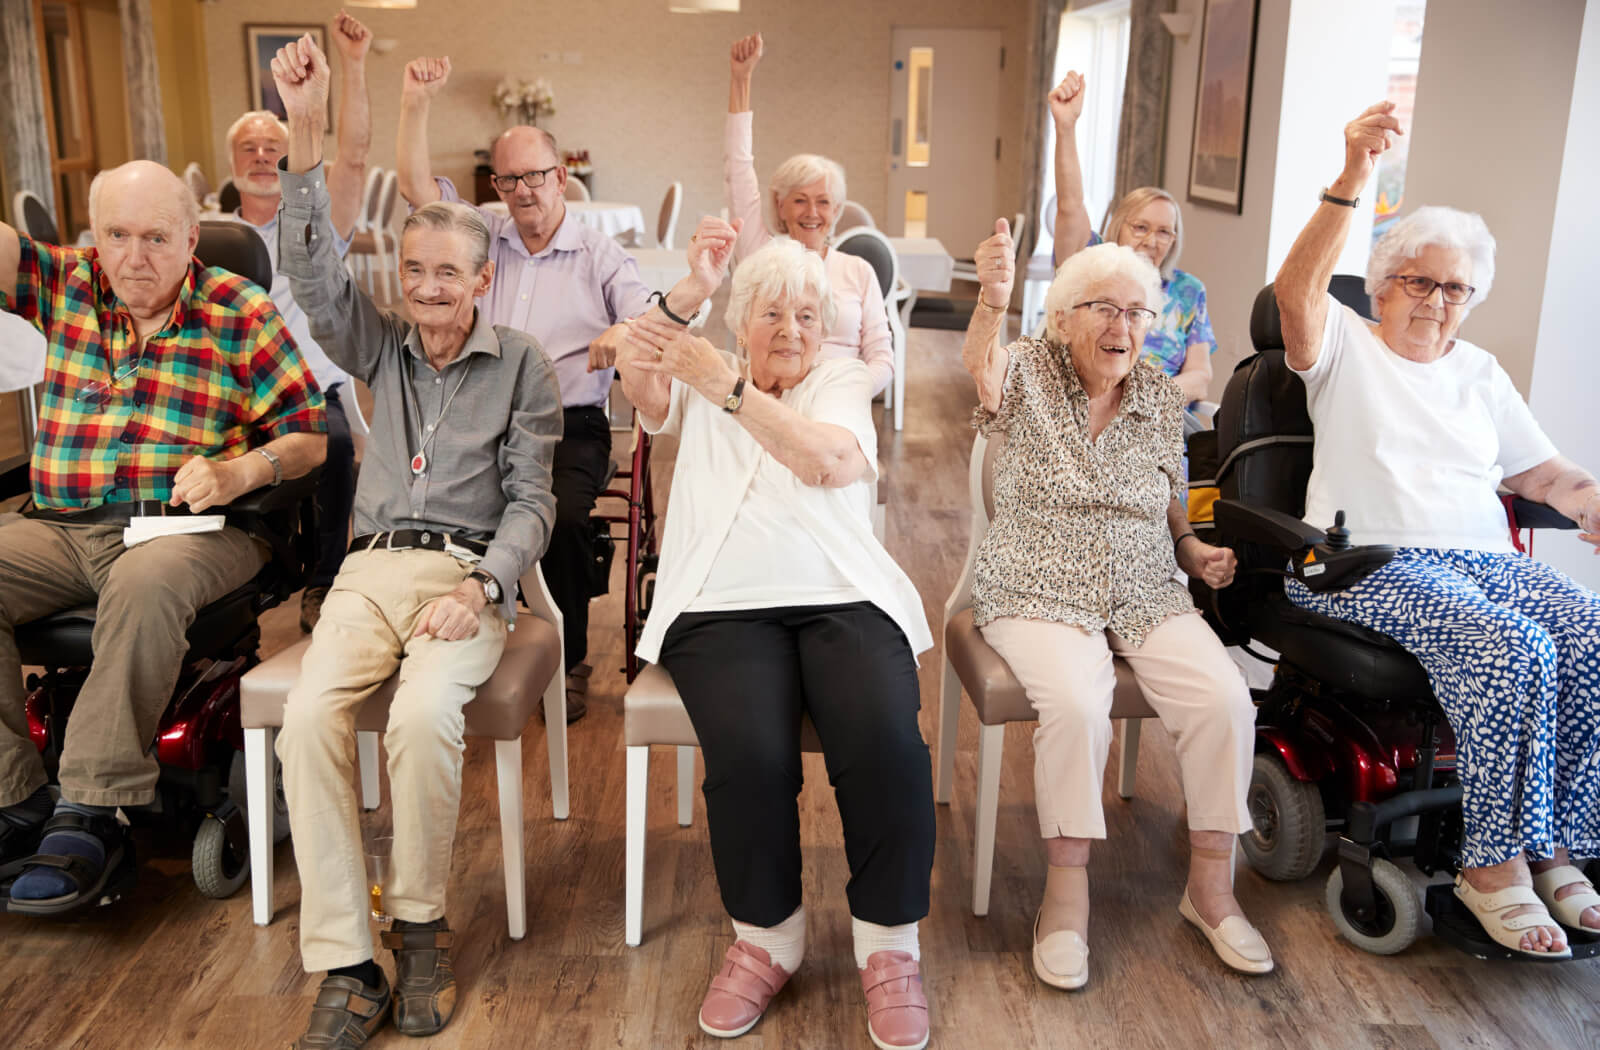 A group of seniors in a senior living community sitting and exercising together